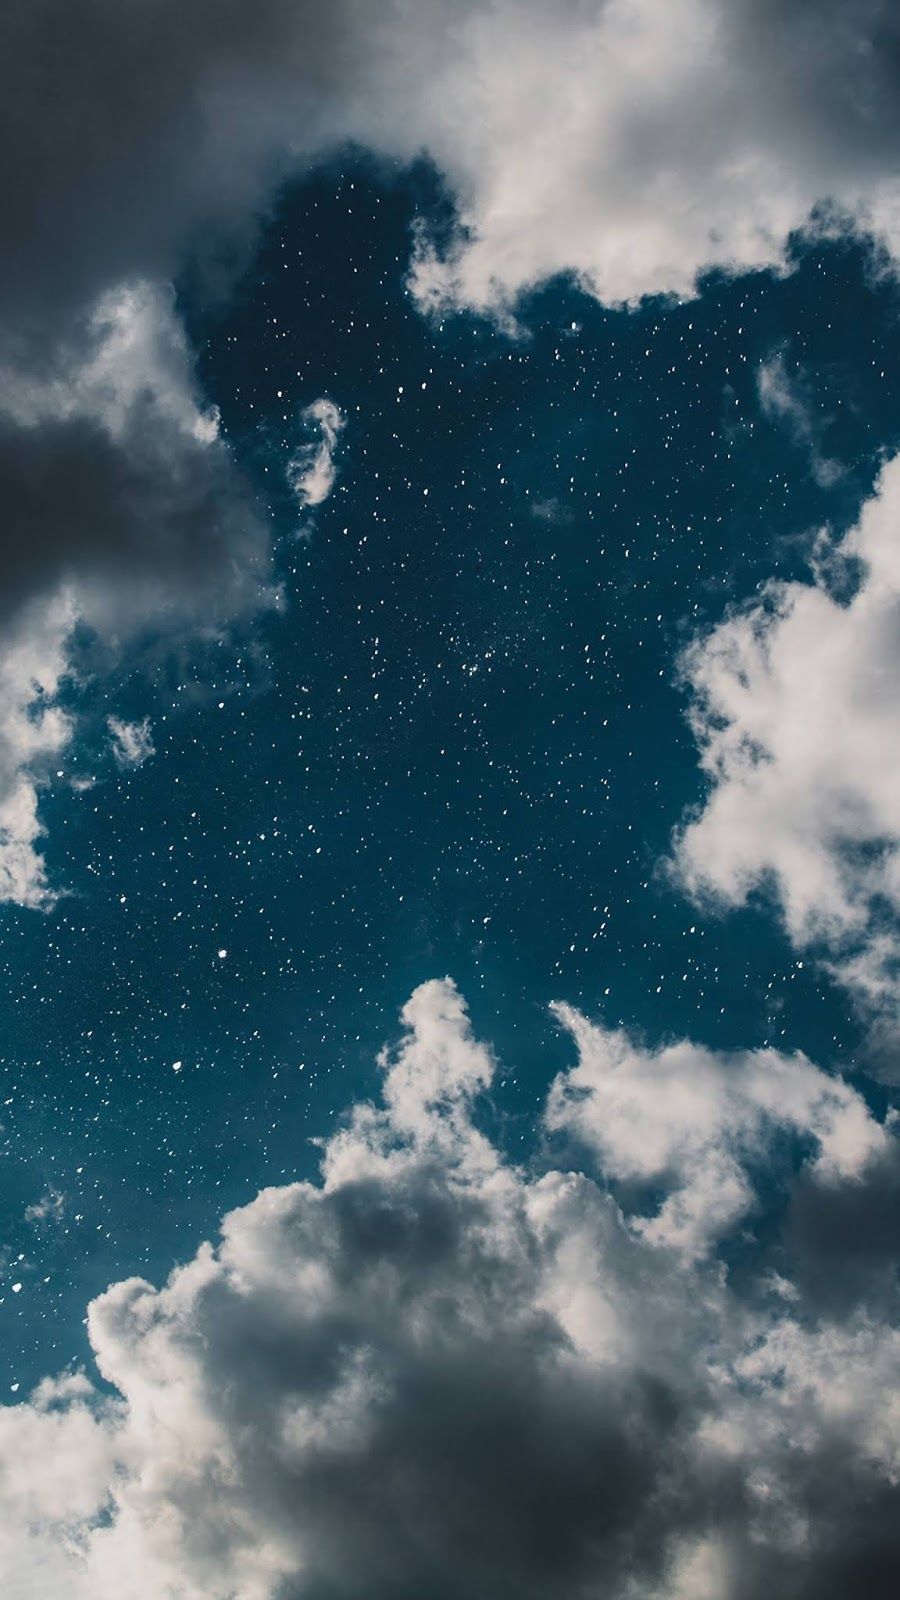 Clouds and stars in the sky - Blue, vintage clouds